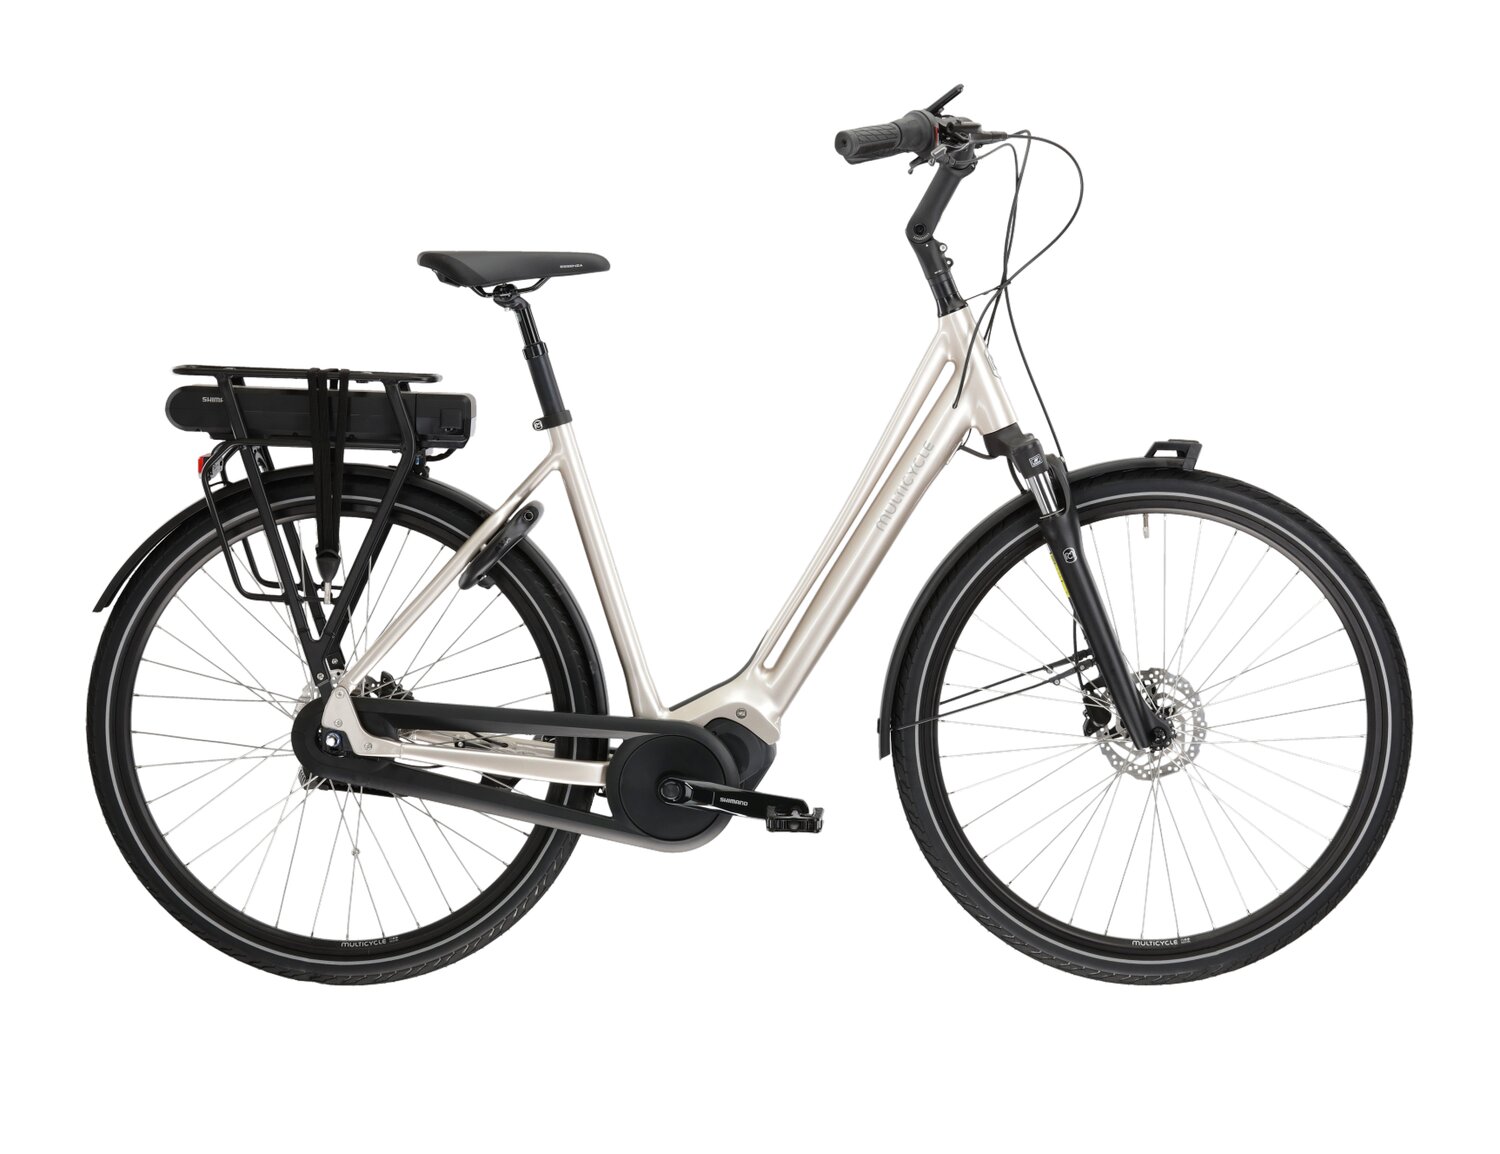 Solo EMI Multicycle 418 WH